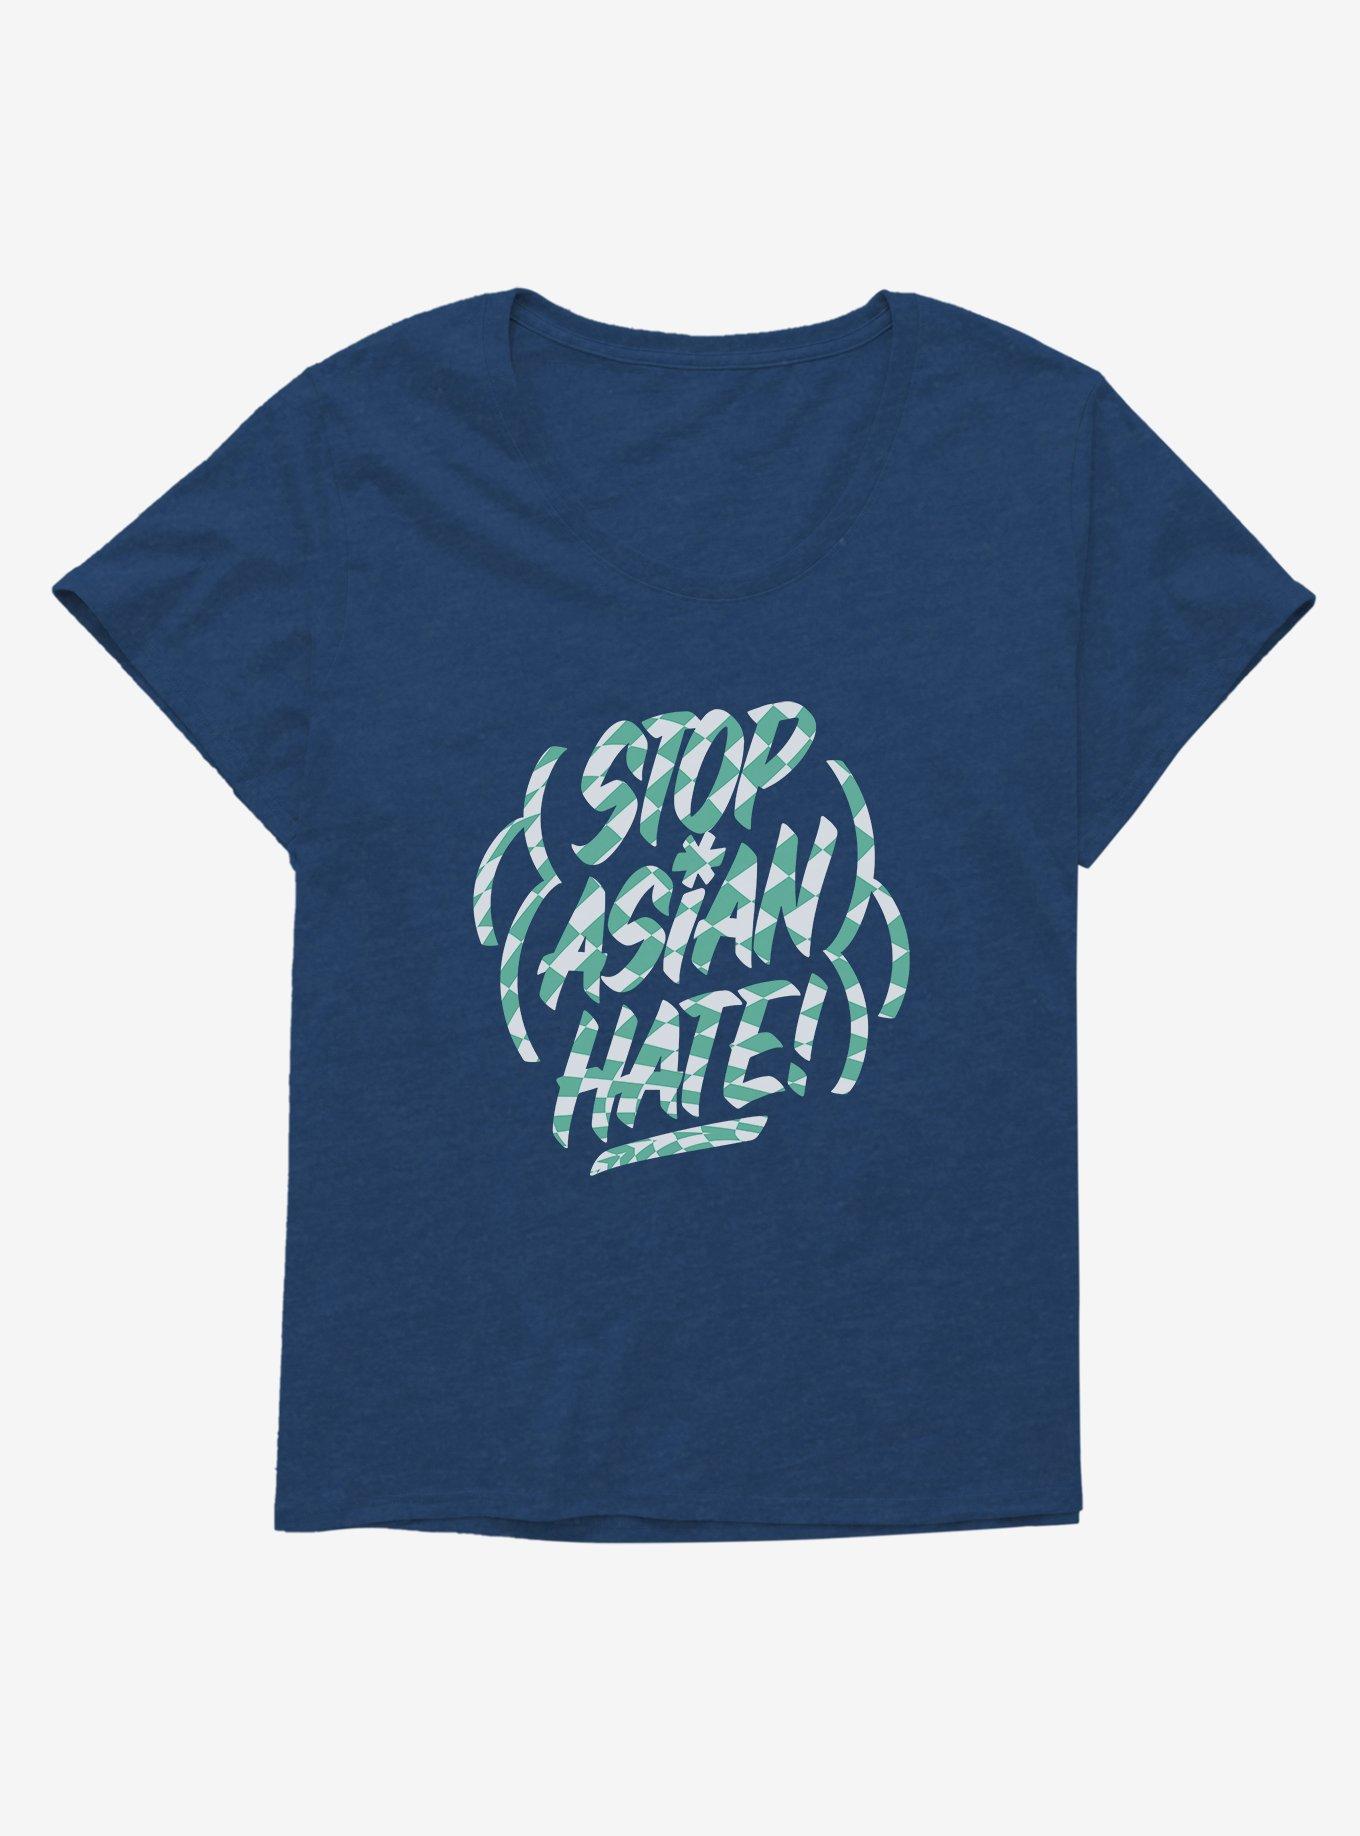 Checkered Stop Asian Hate Girls T-Shirt Plus